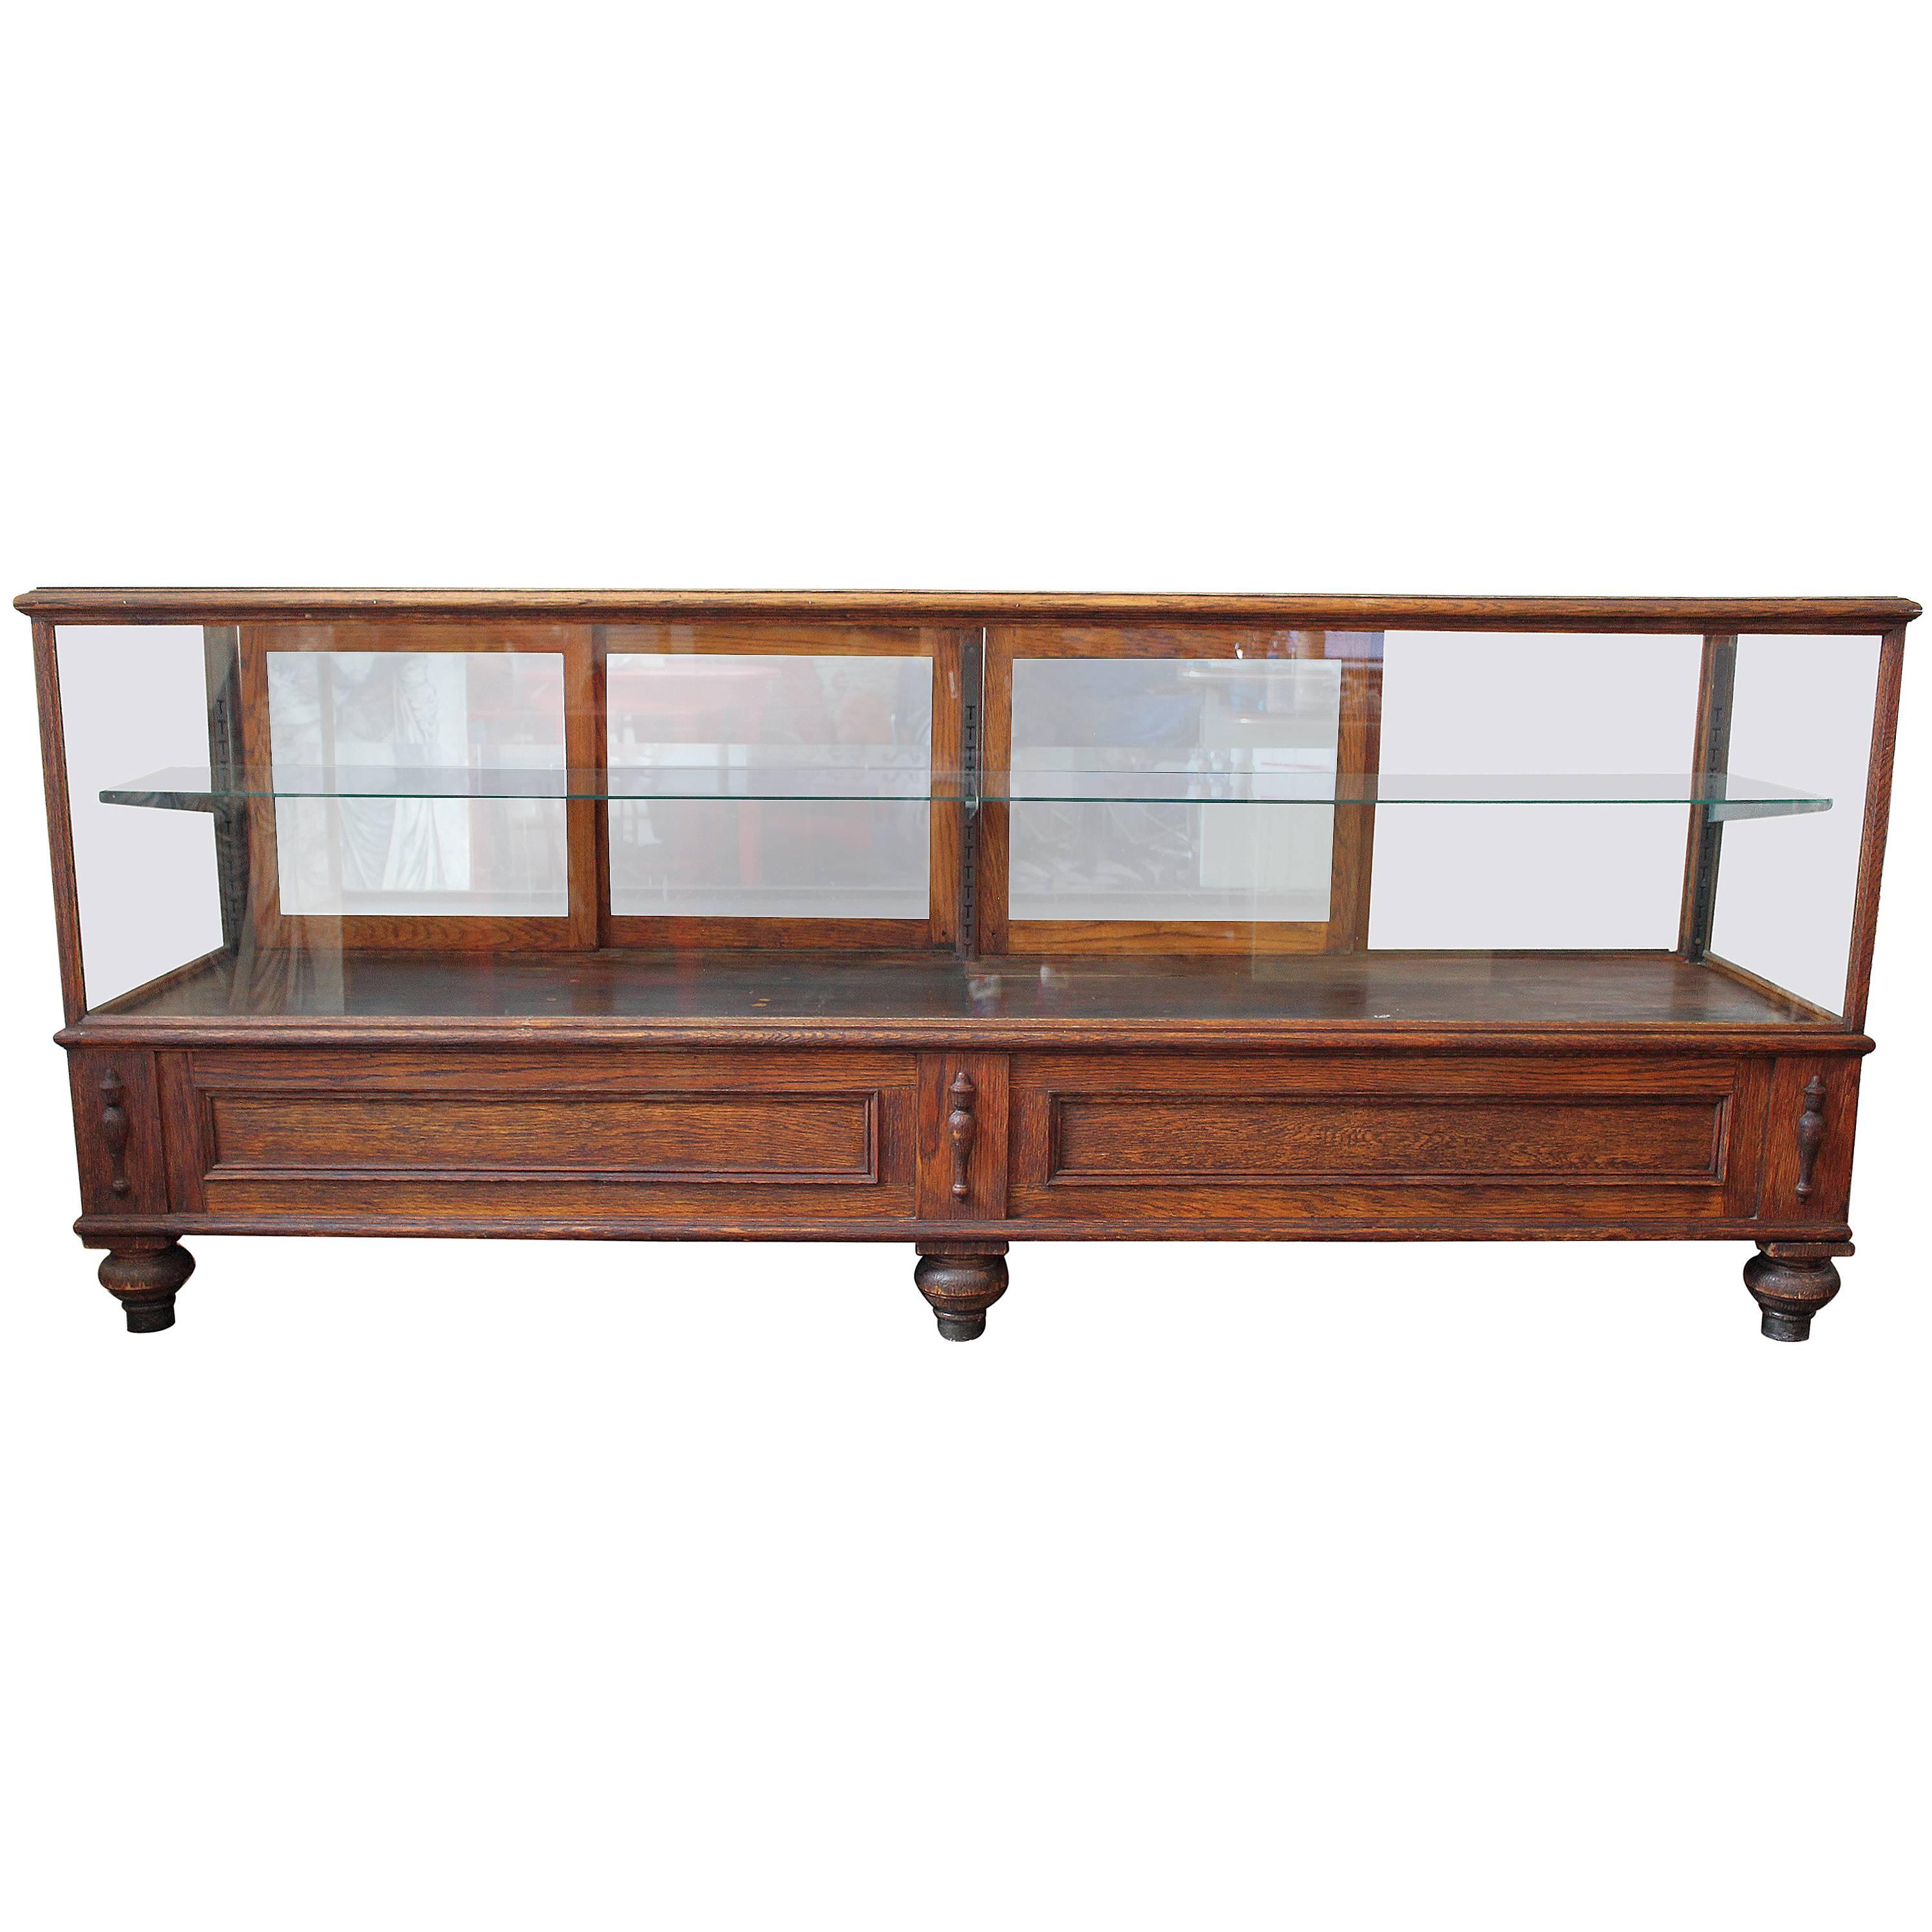 Antique Glass Case by Grand Rapid Store Equipment